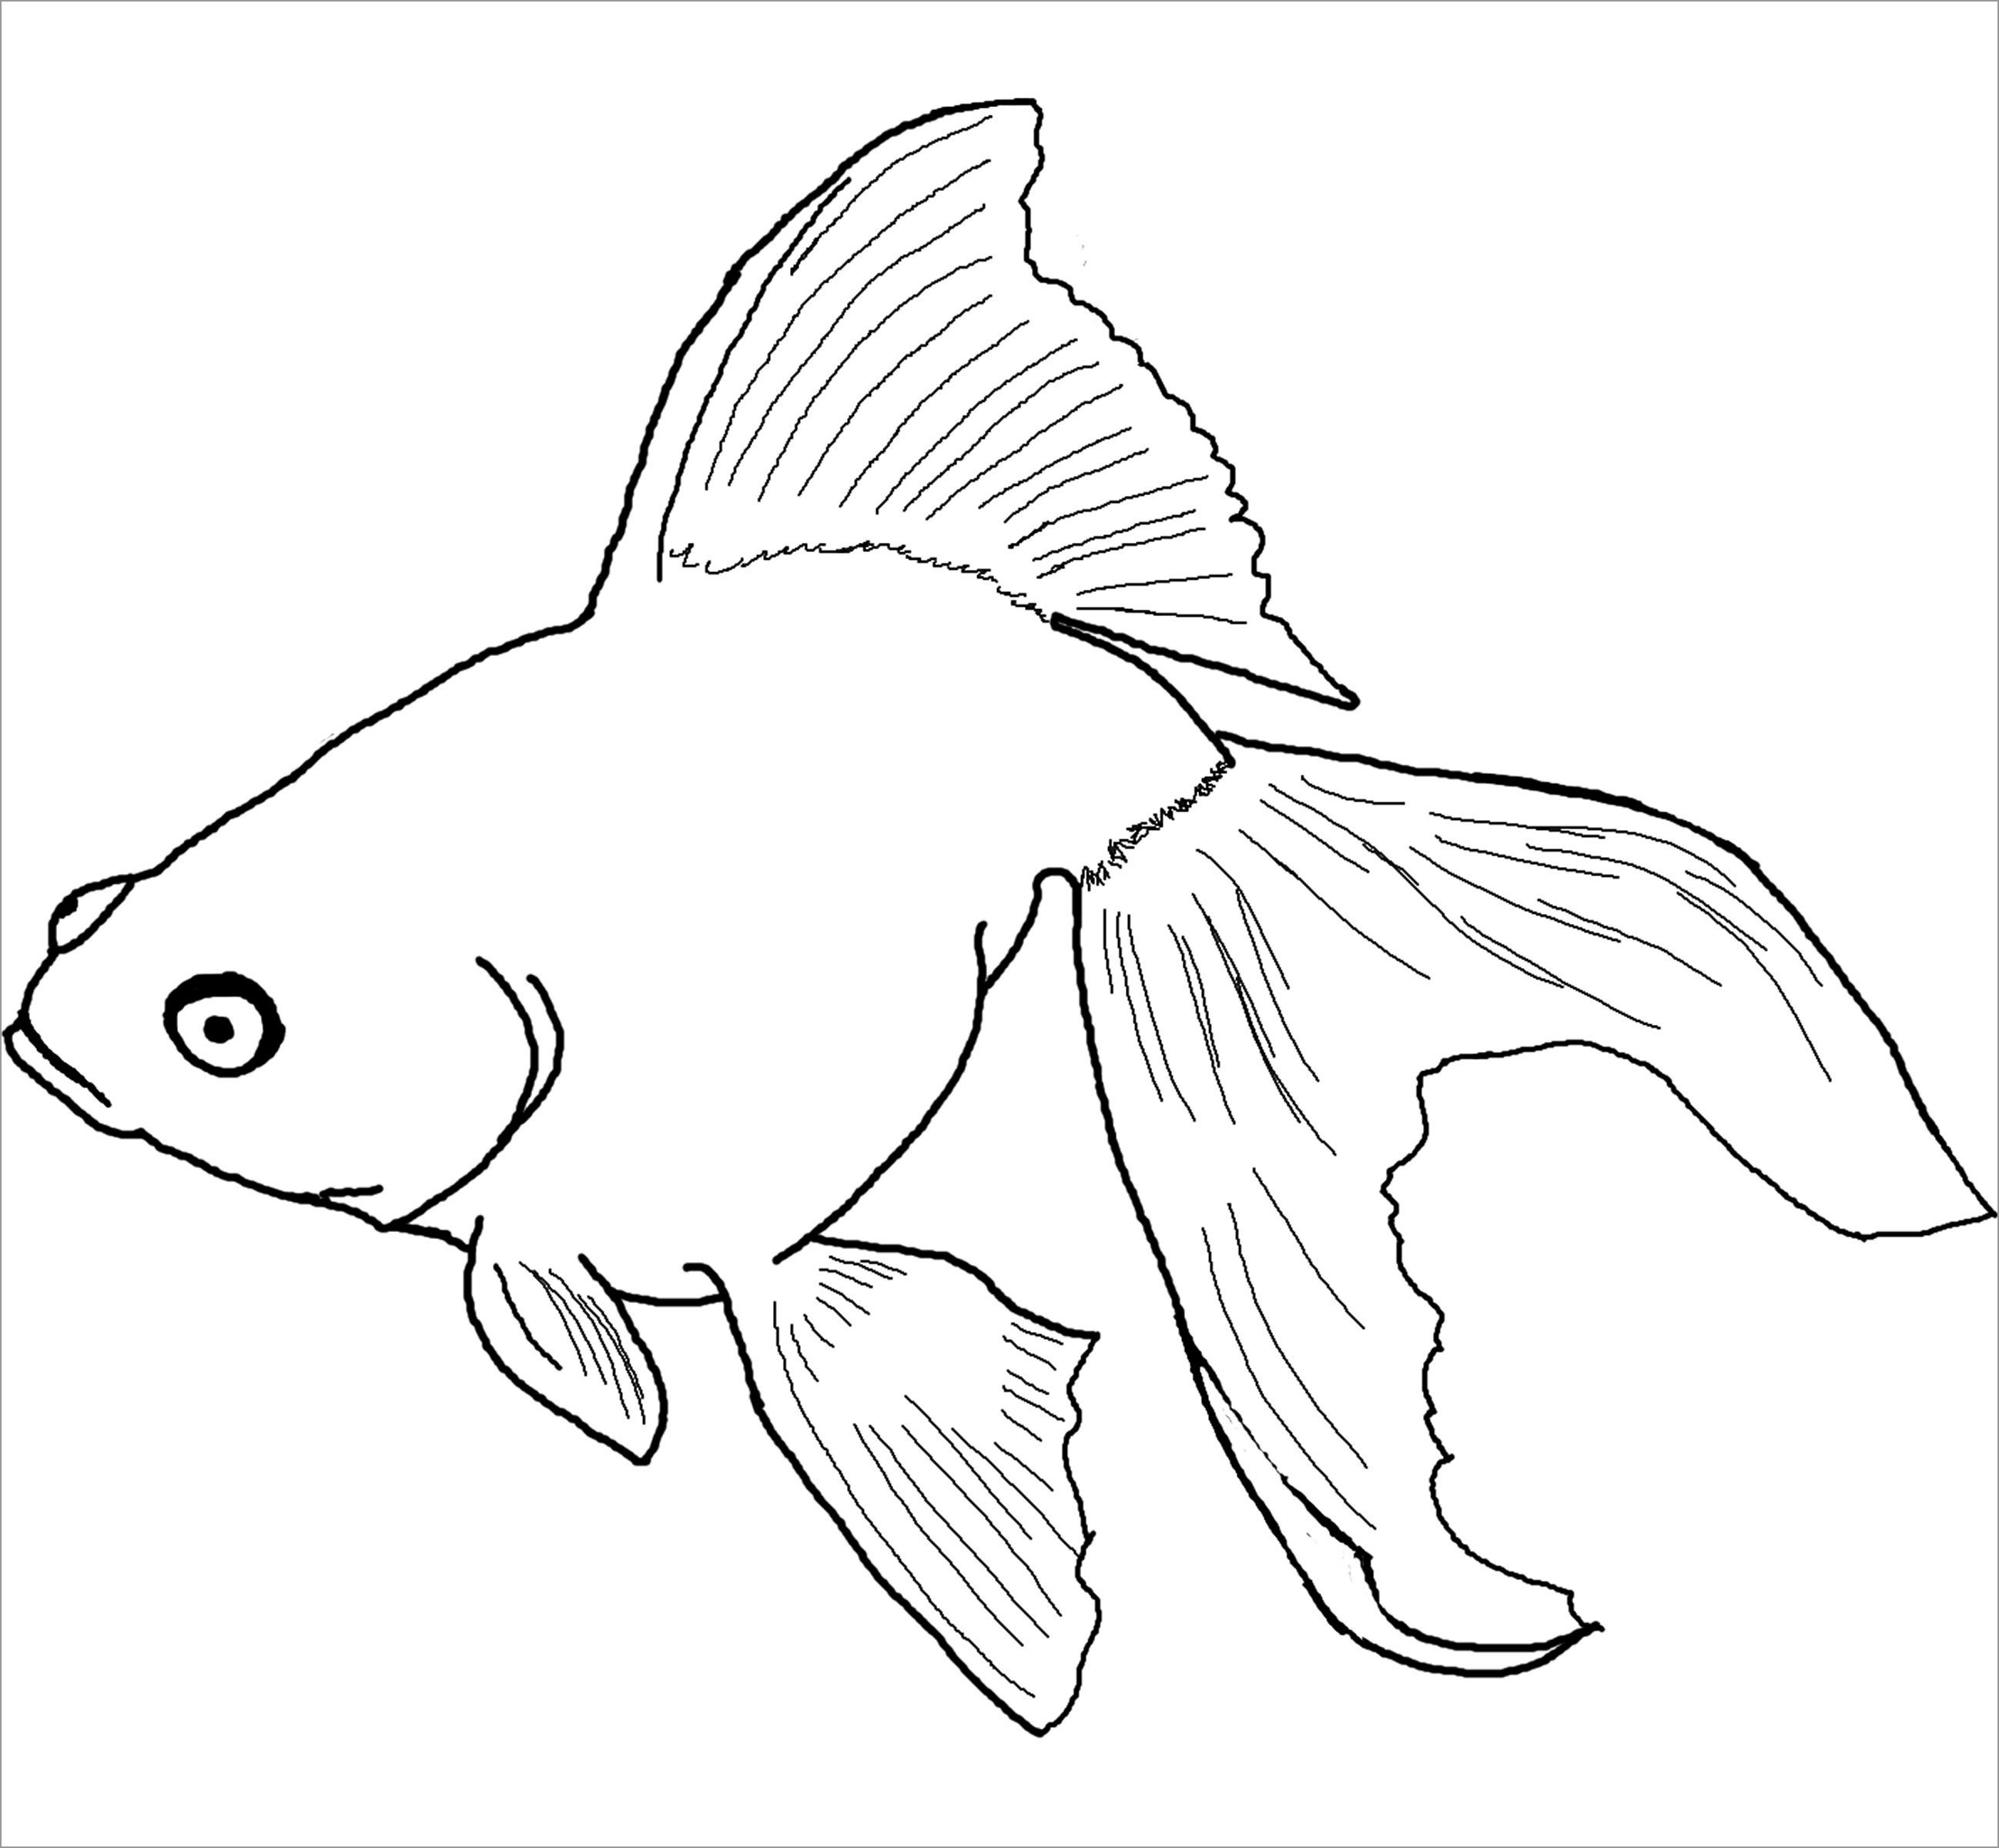 Betta Fish Coloring Pages - ColoringBay